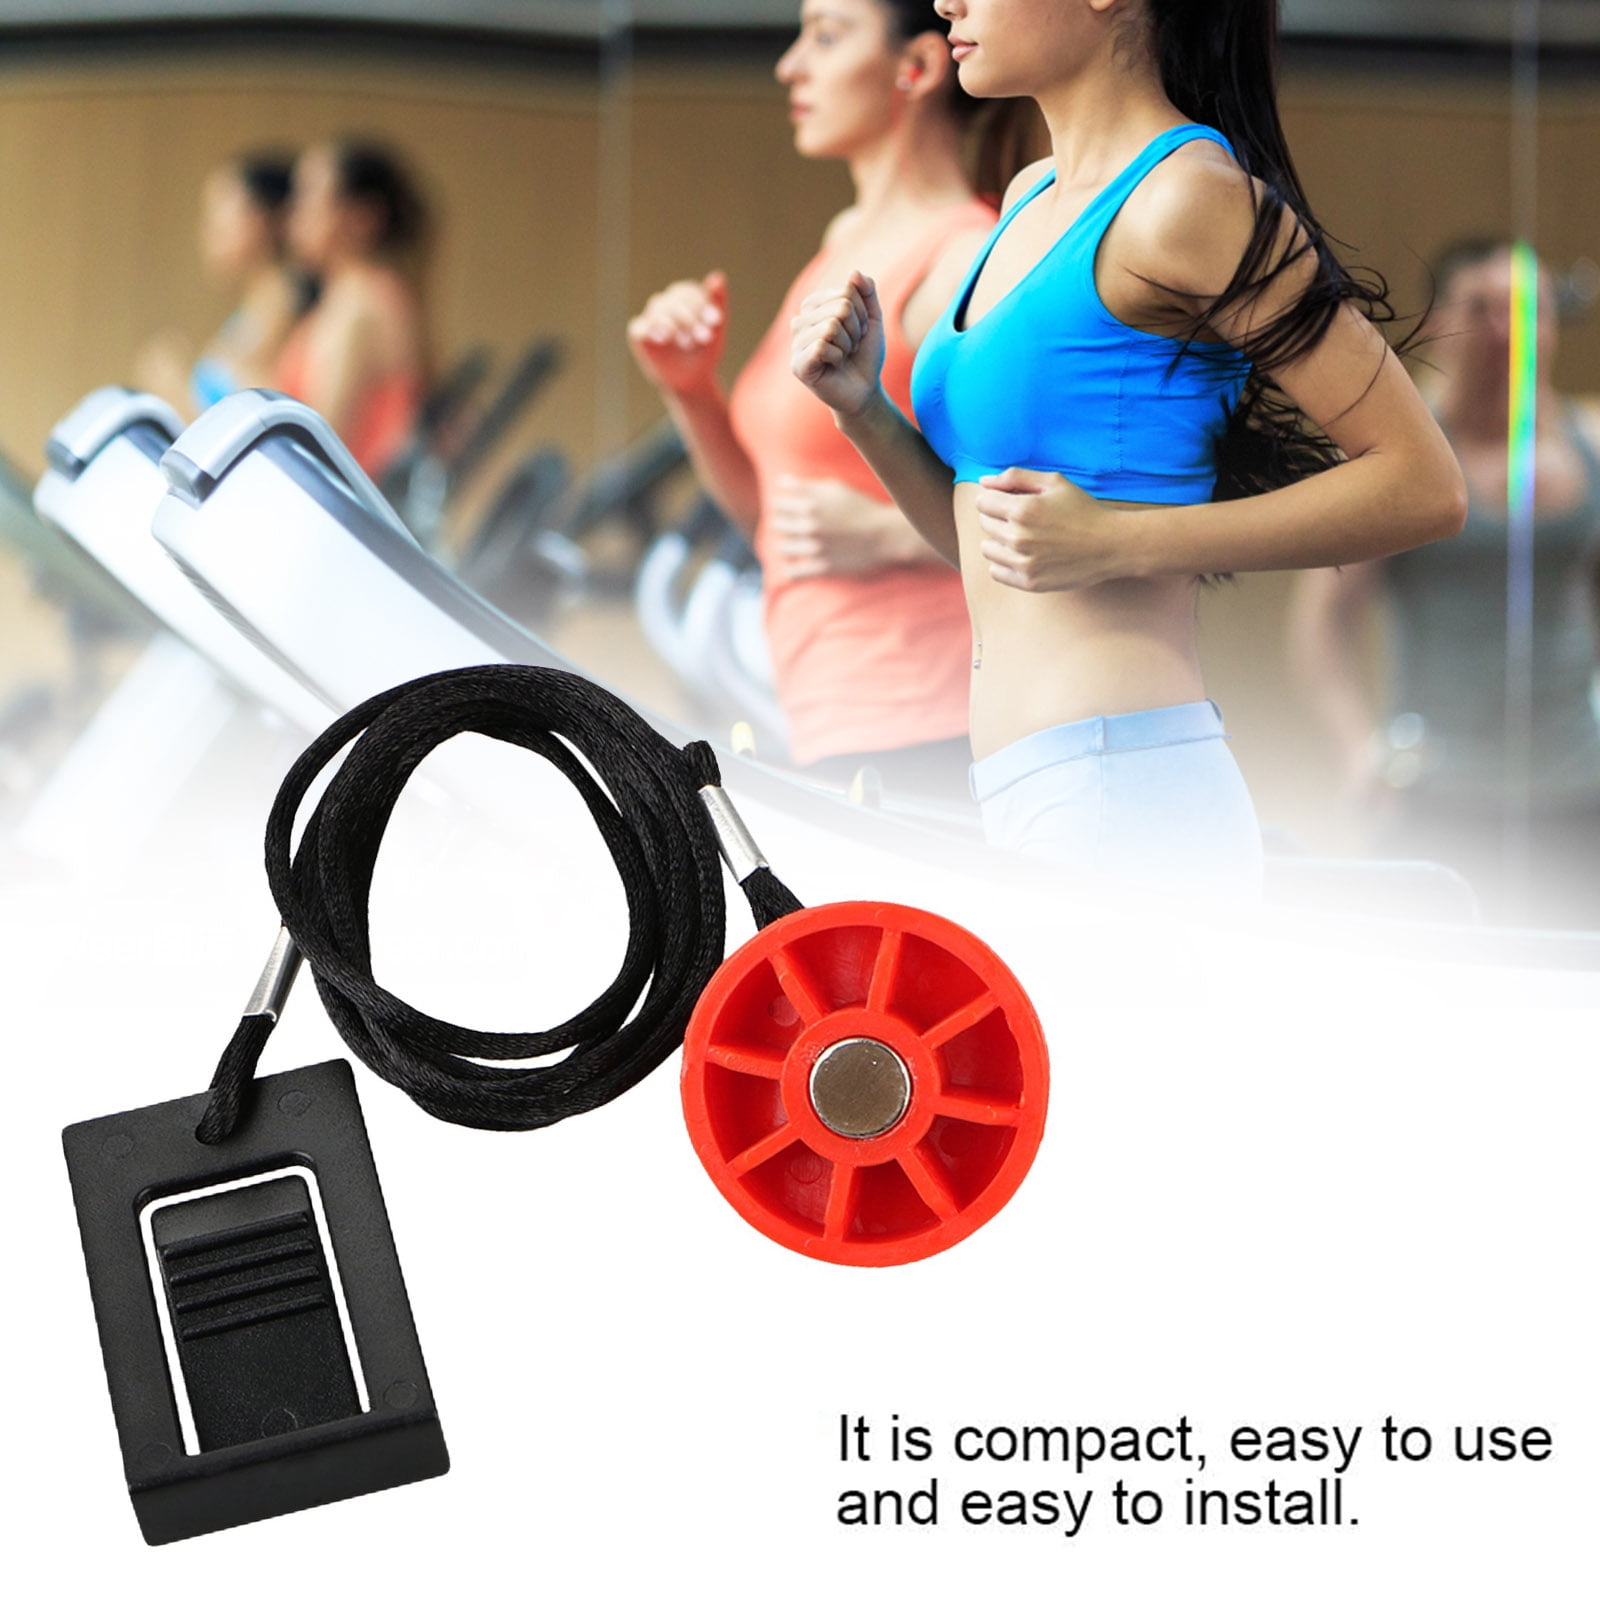 RED MAGNETIC TREADMILL FITNESS RUNNING MACHINE SAFETY KEY REPLACEMENT TAG UK 